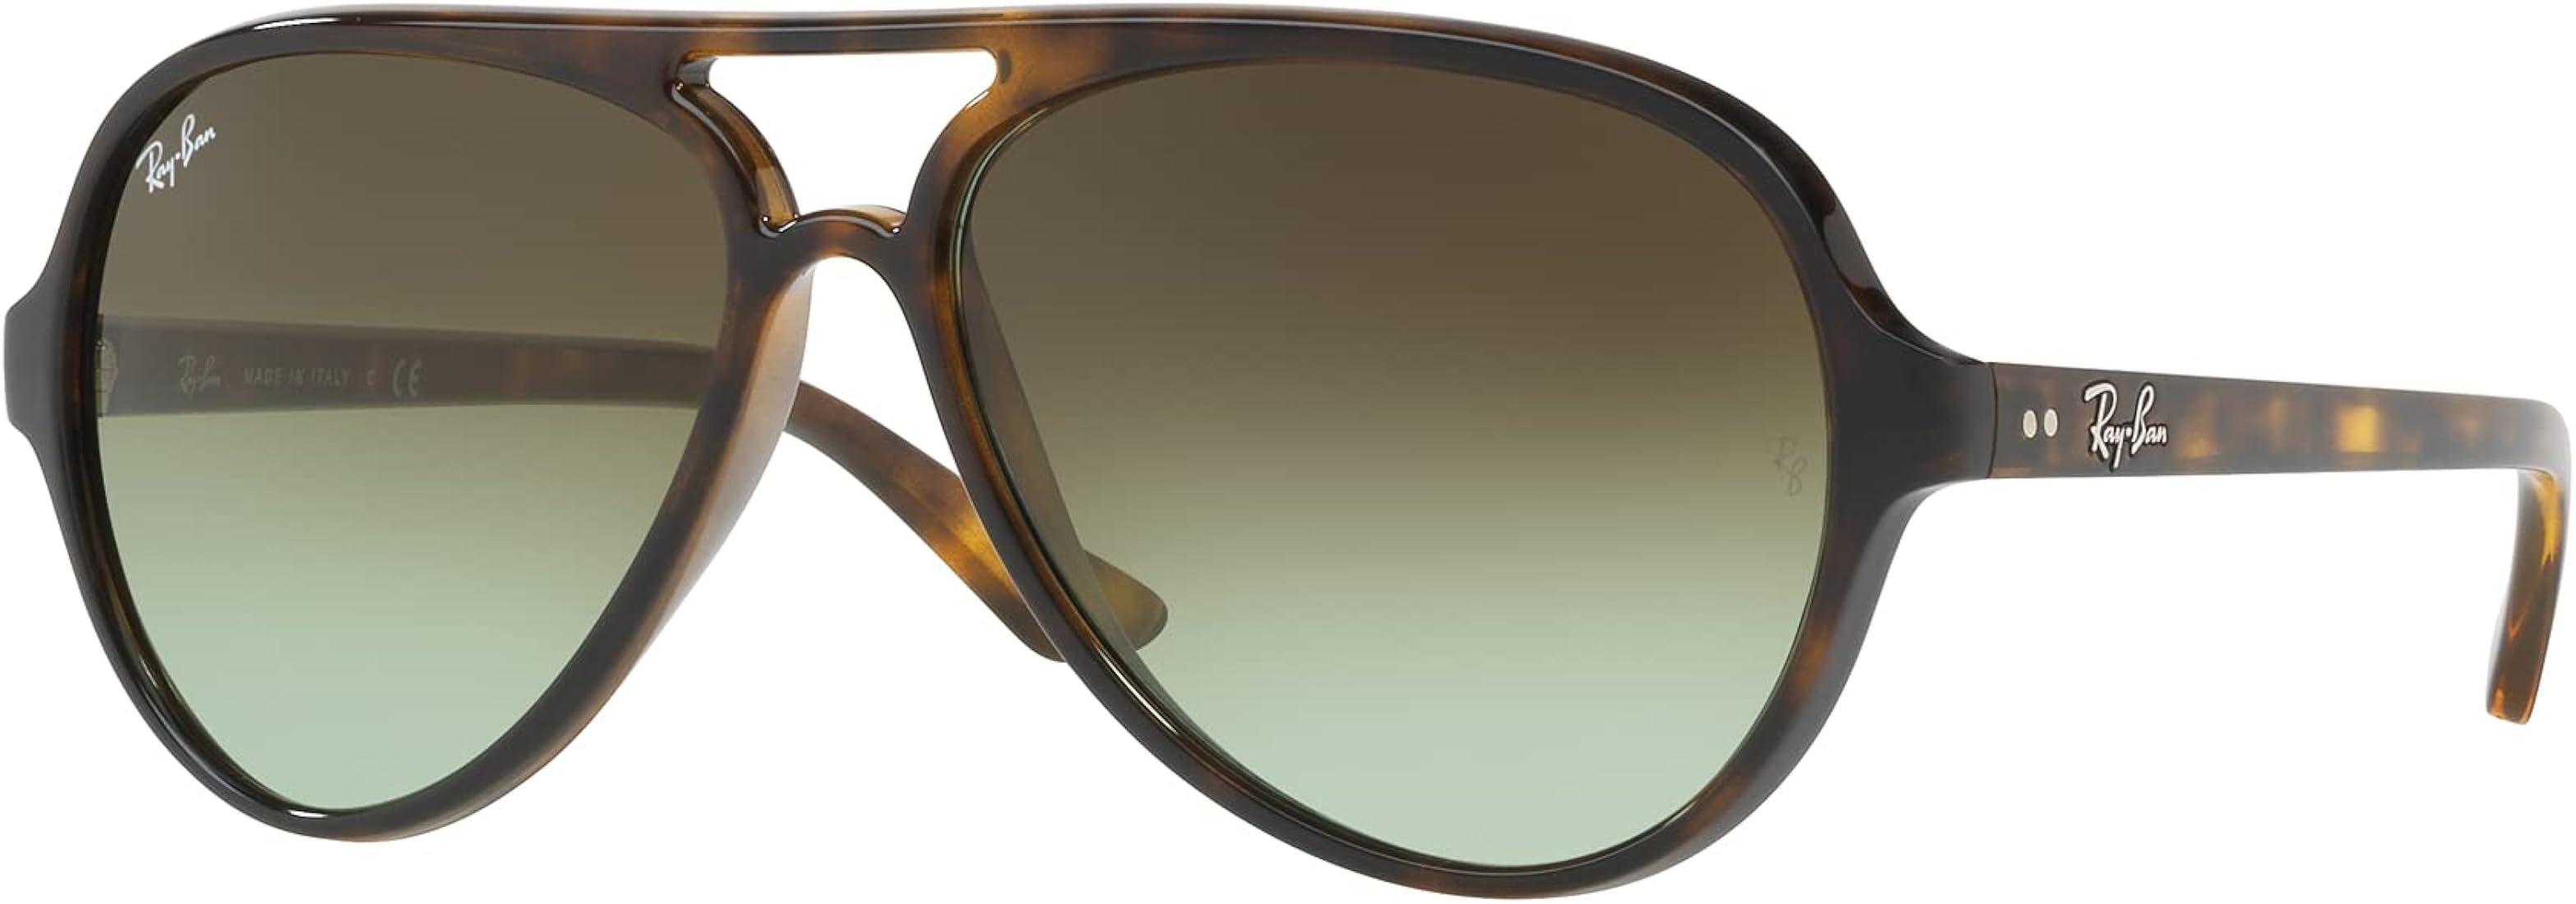 Ray-Ban RB4125 Cats 5000 Sunglasses + Vision Group Accessories Bundle | Amazon (US)